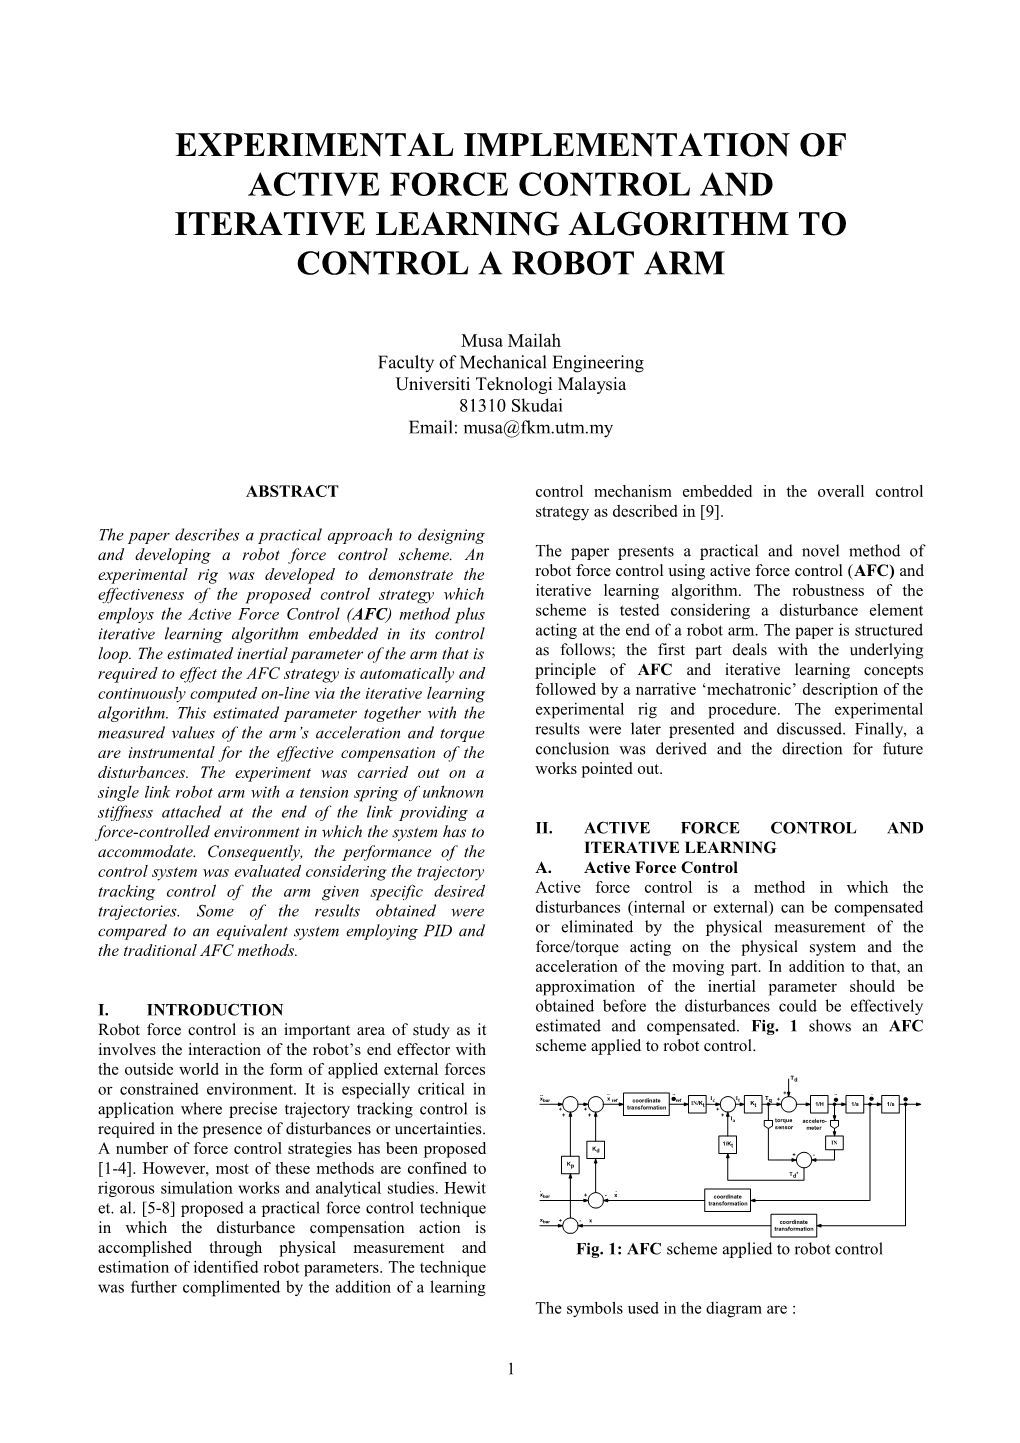 Experimental Implementation of Active Force Control and Iterative Learning Algorithm To